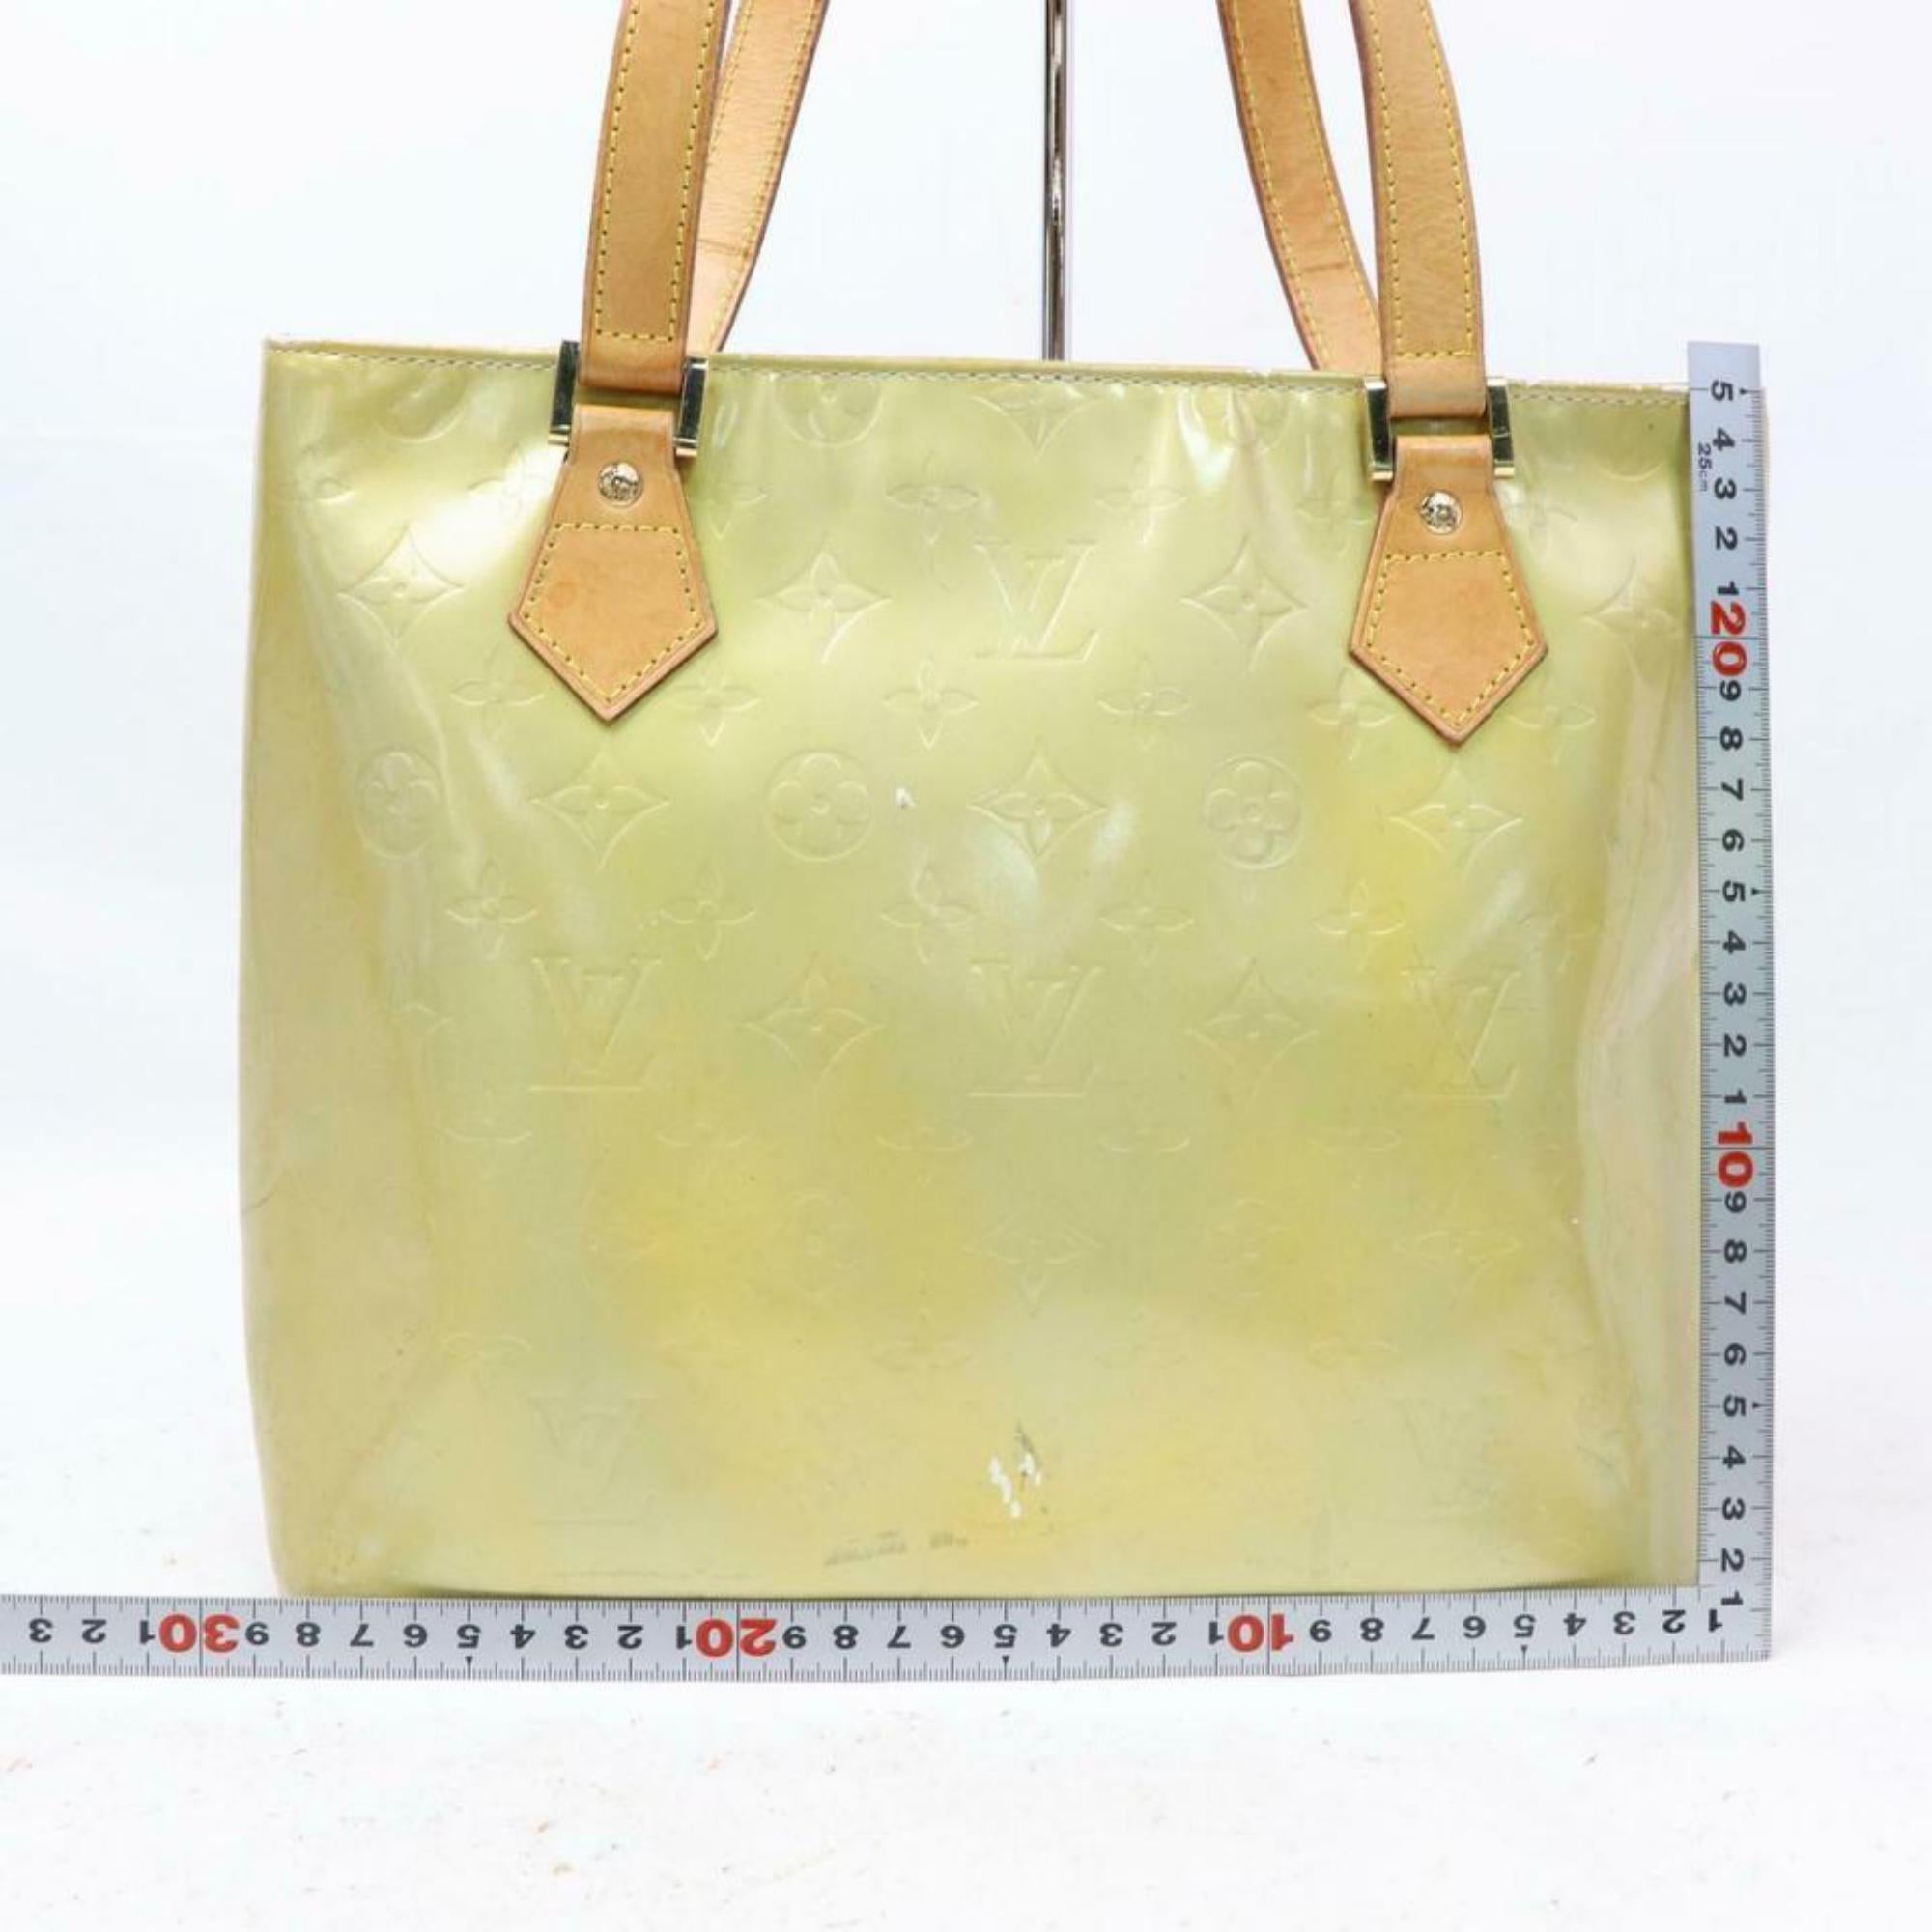 Women's Louis Vuitton Houston Zip Tote 870593 Green-gold Vernis Leather and Shoulder Bag For Sale